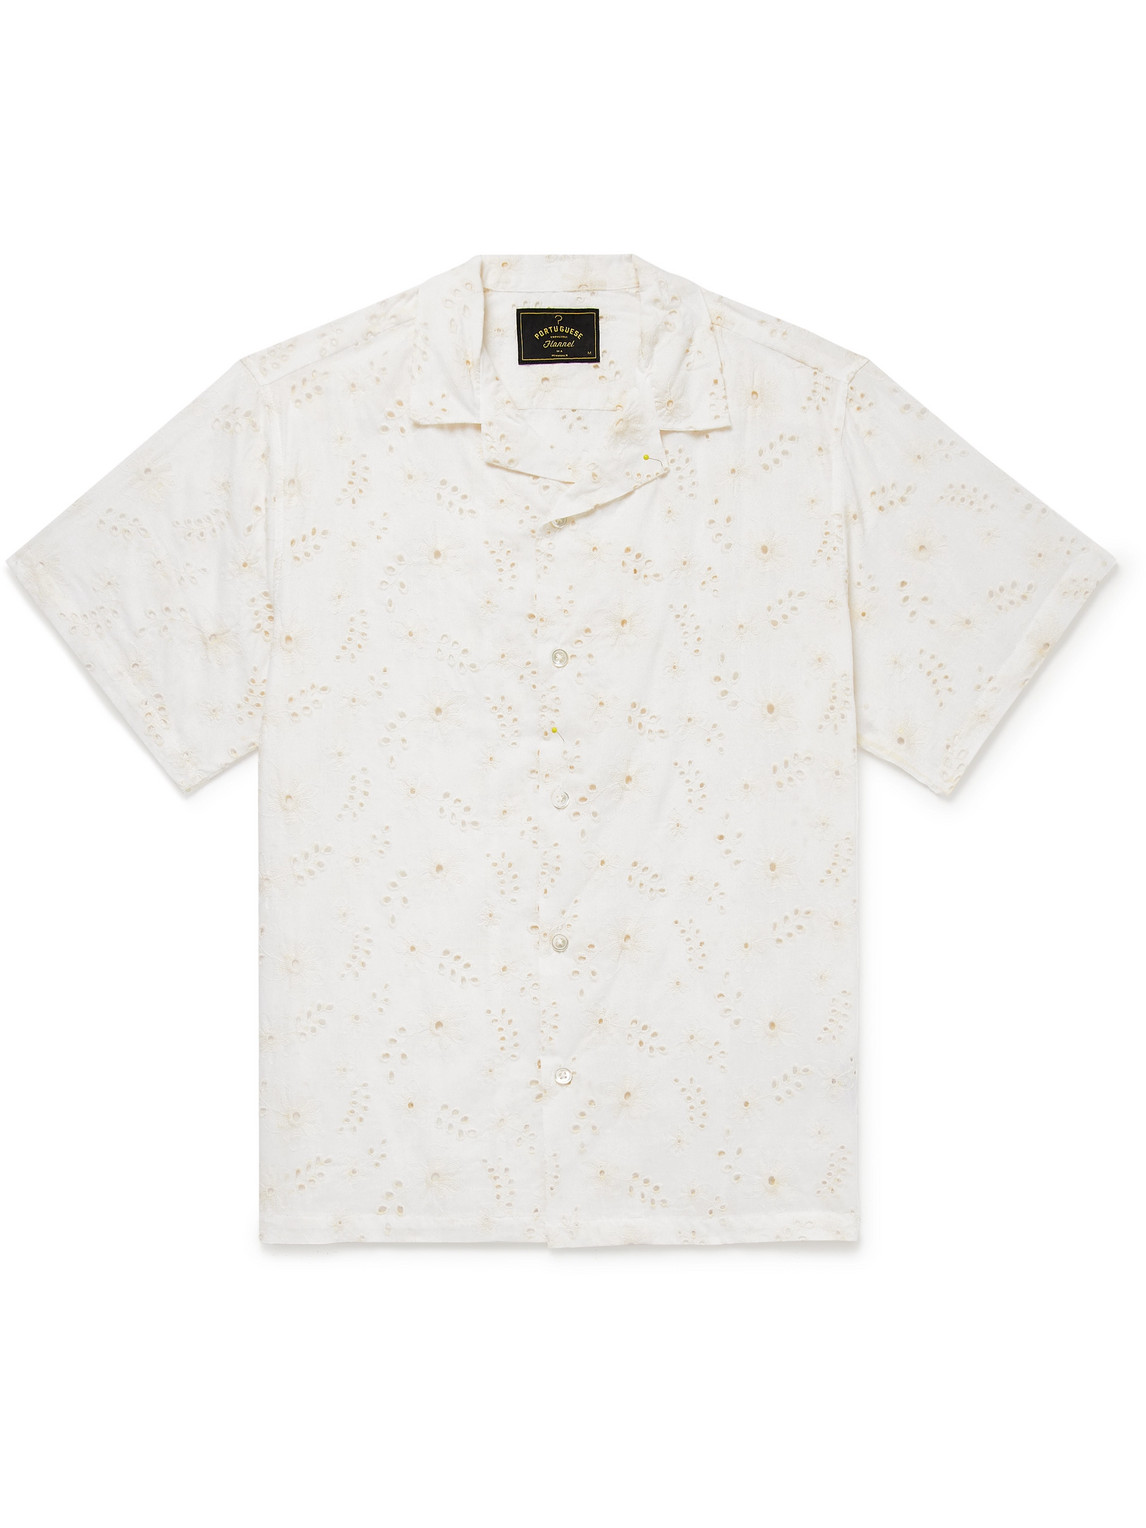 Camp-Collar Broderie Anglaise Cotton-Voile Shirt